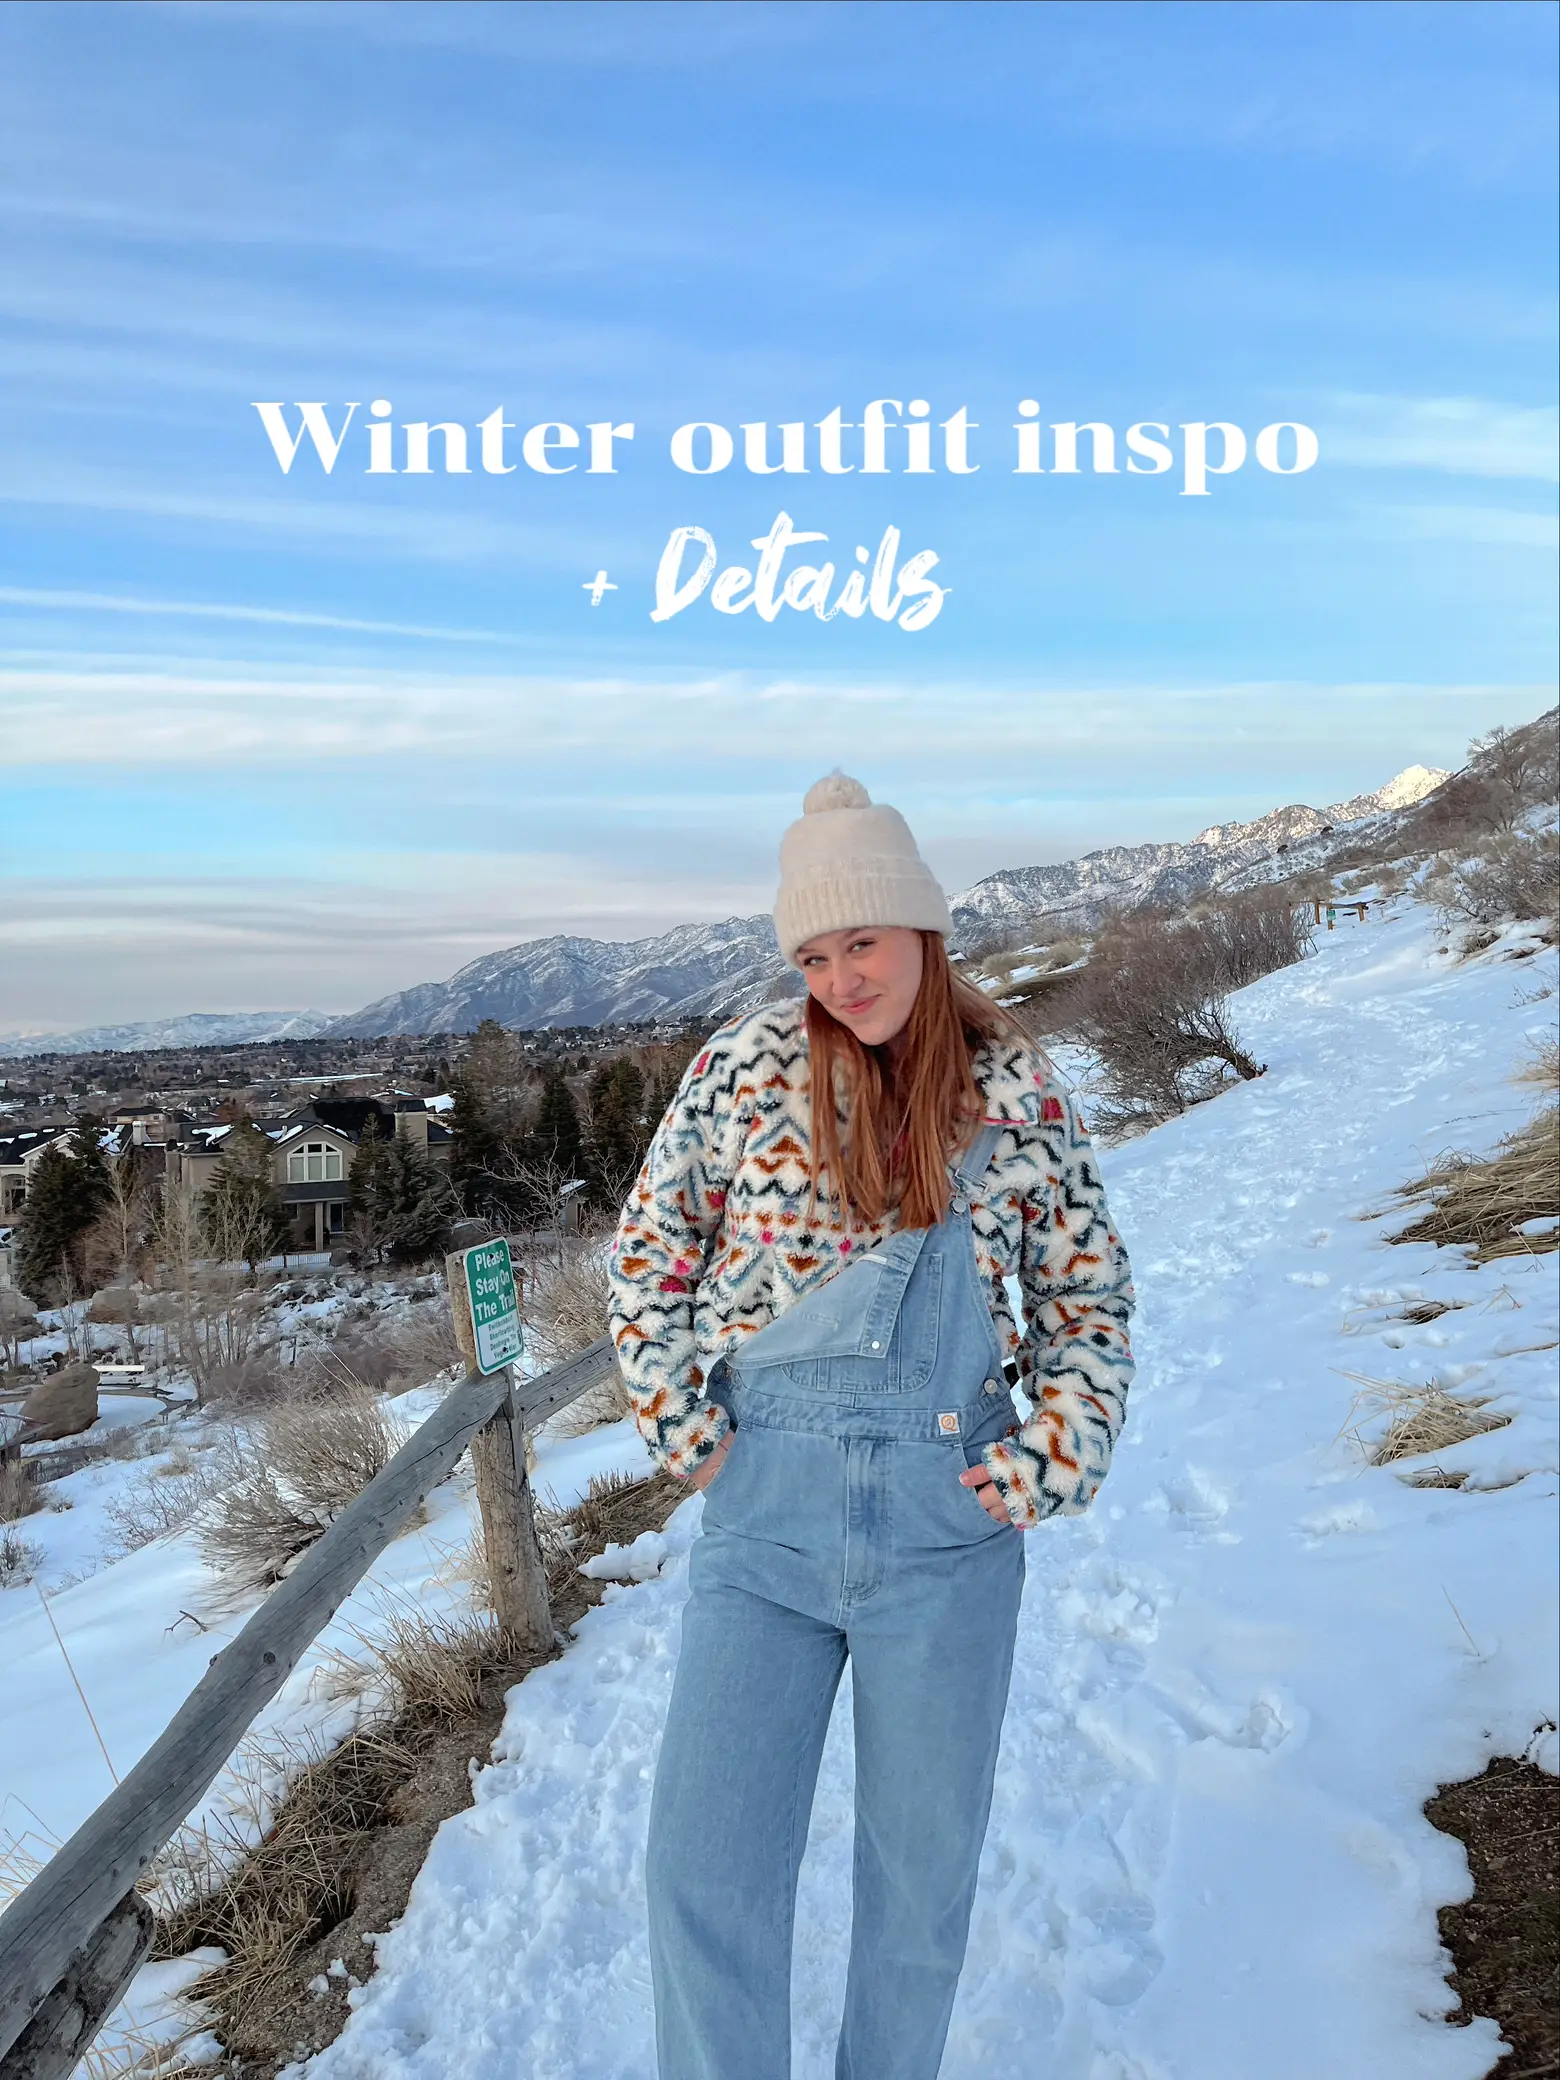 winter outfit ideas with jeans - Lemon8 Search